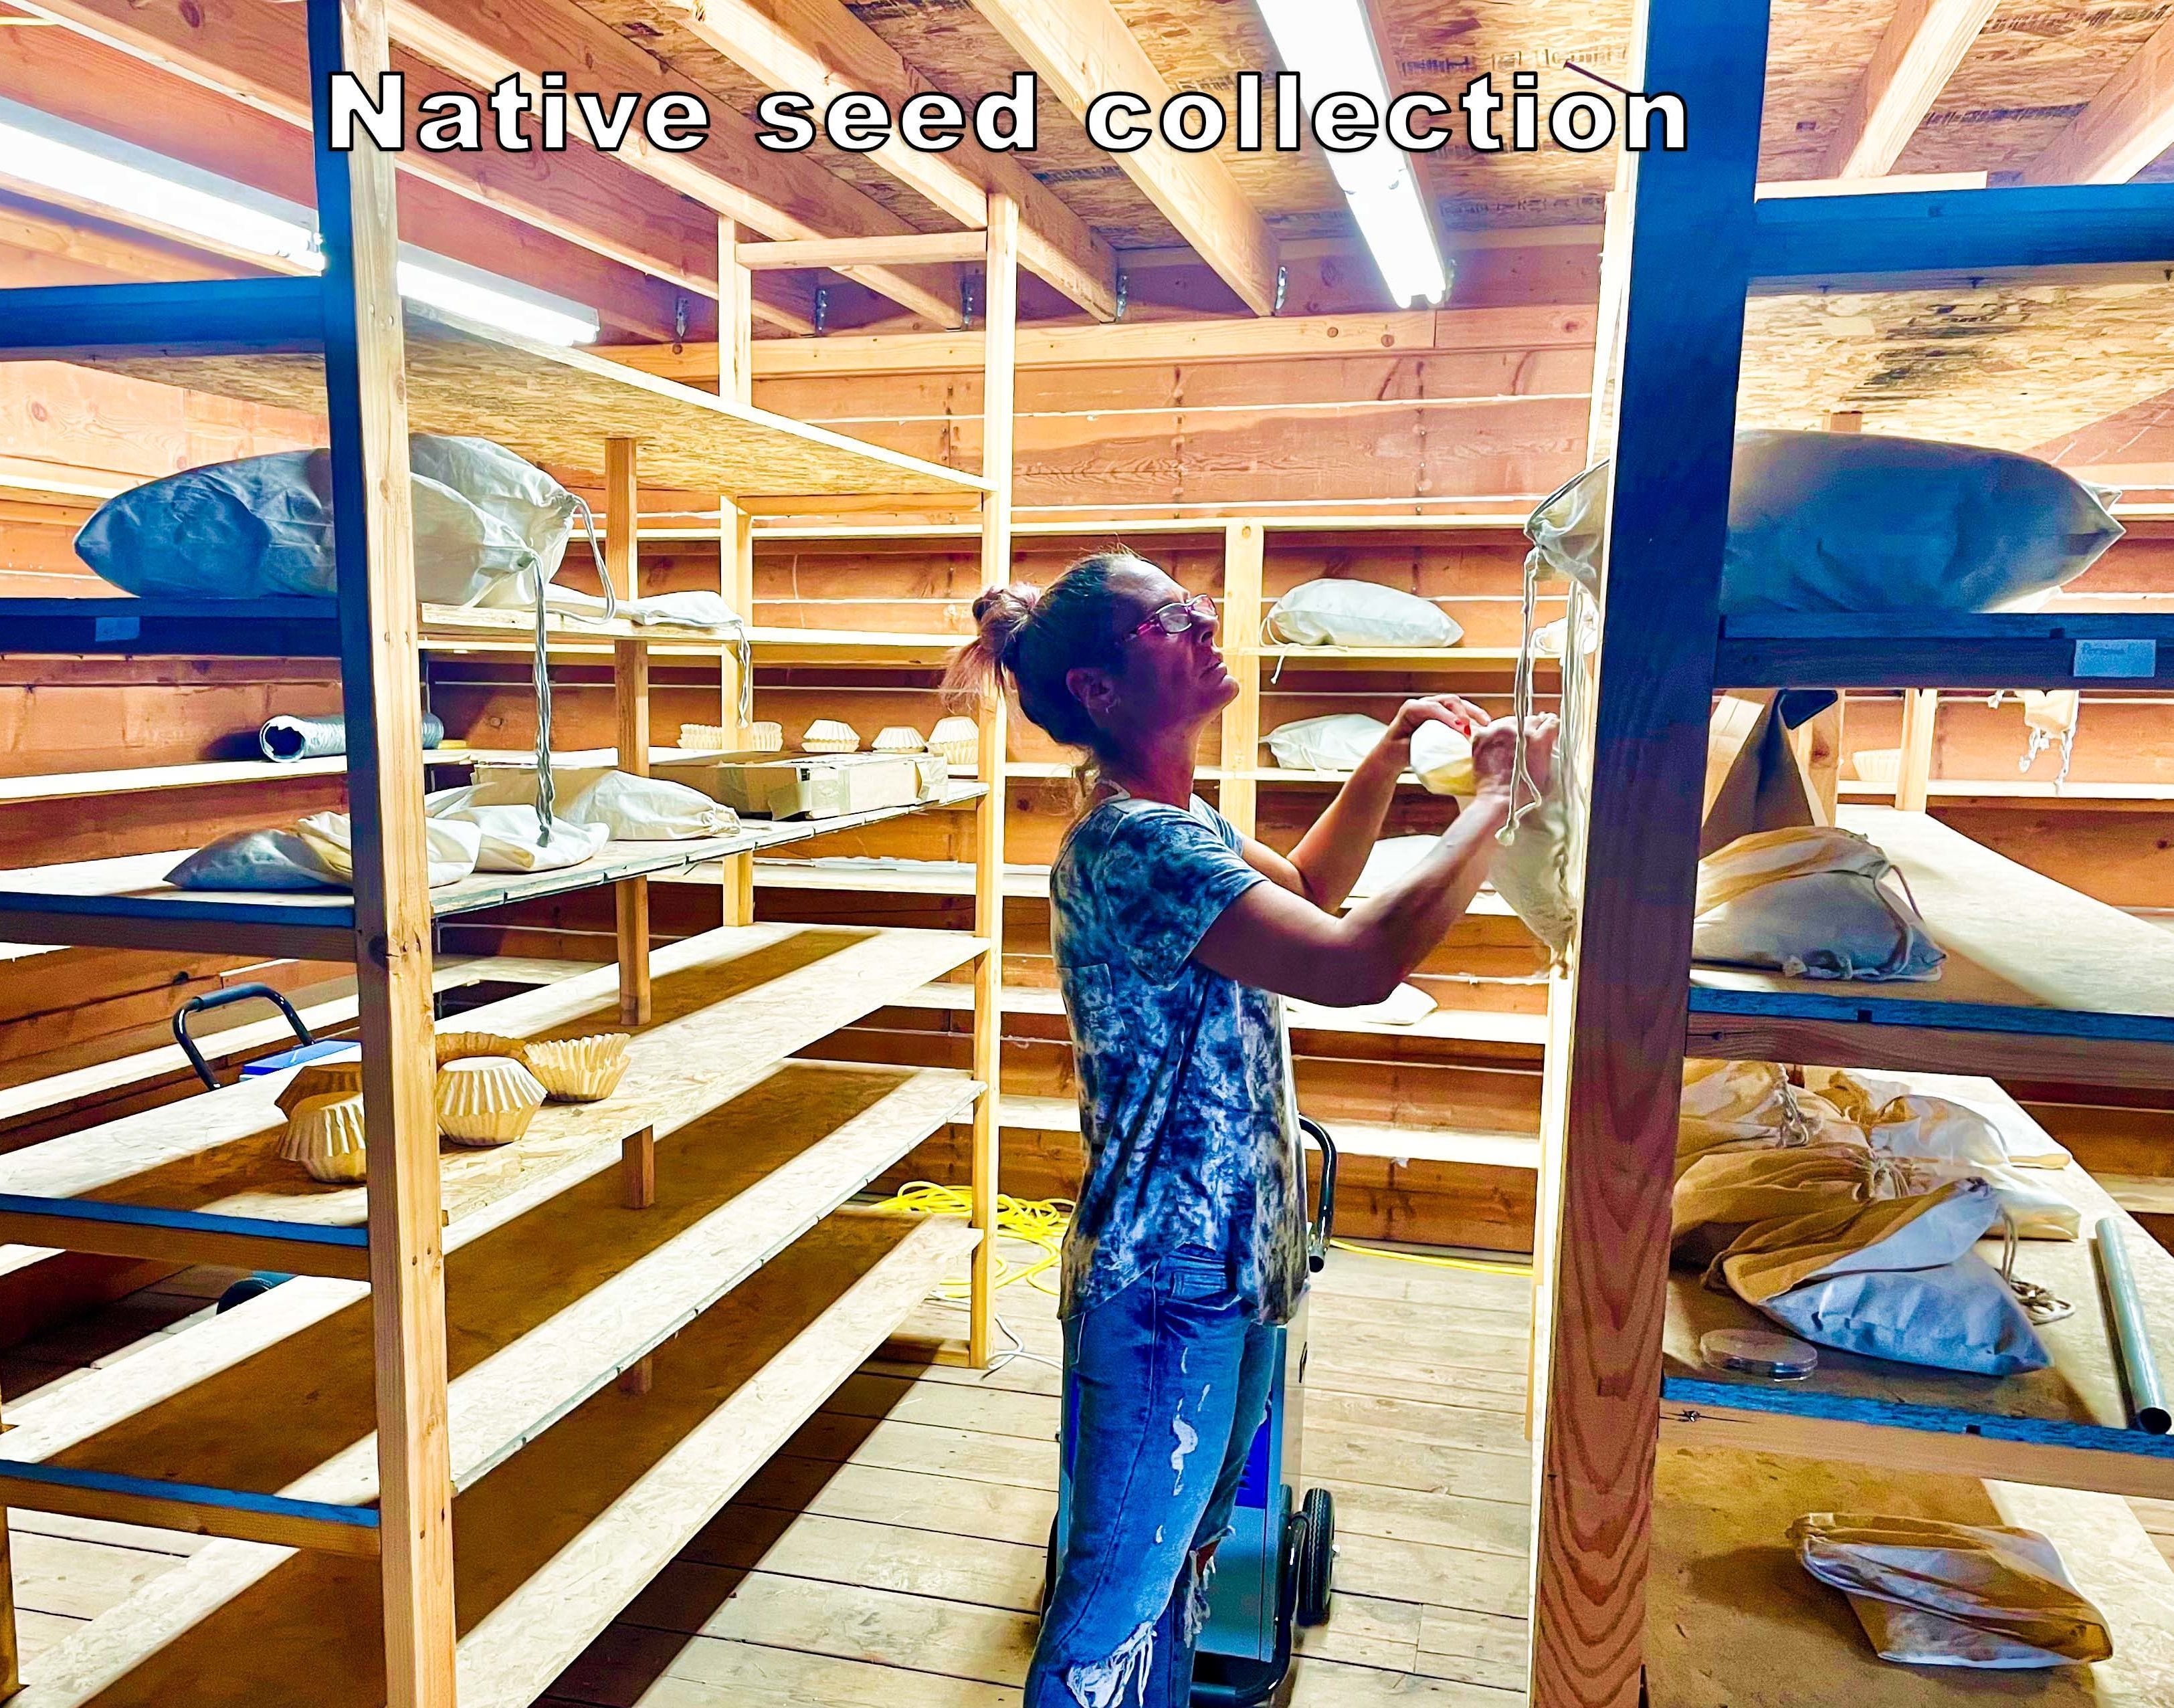 Native seed collection